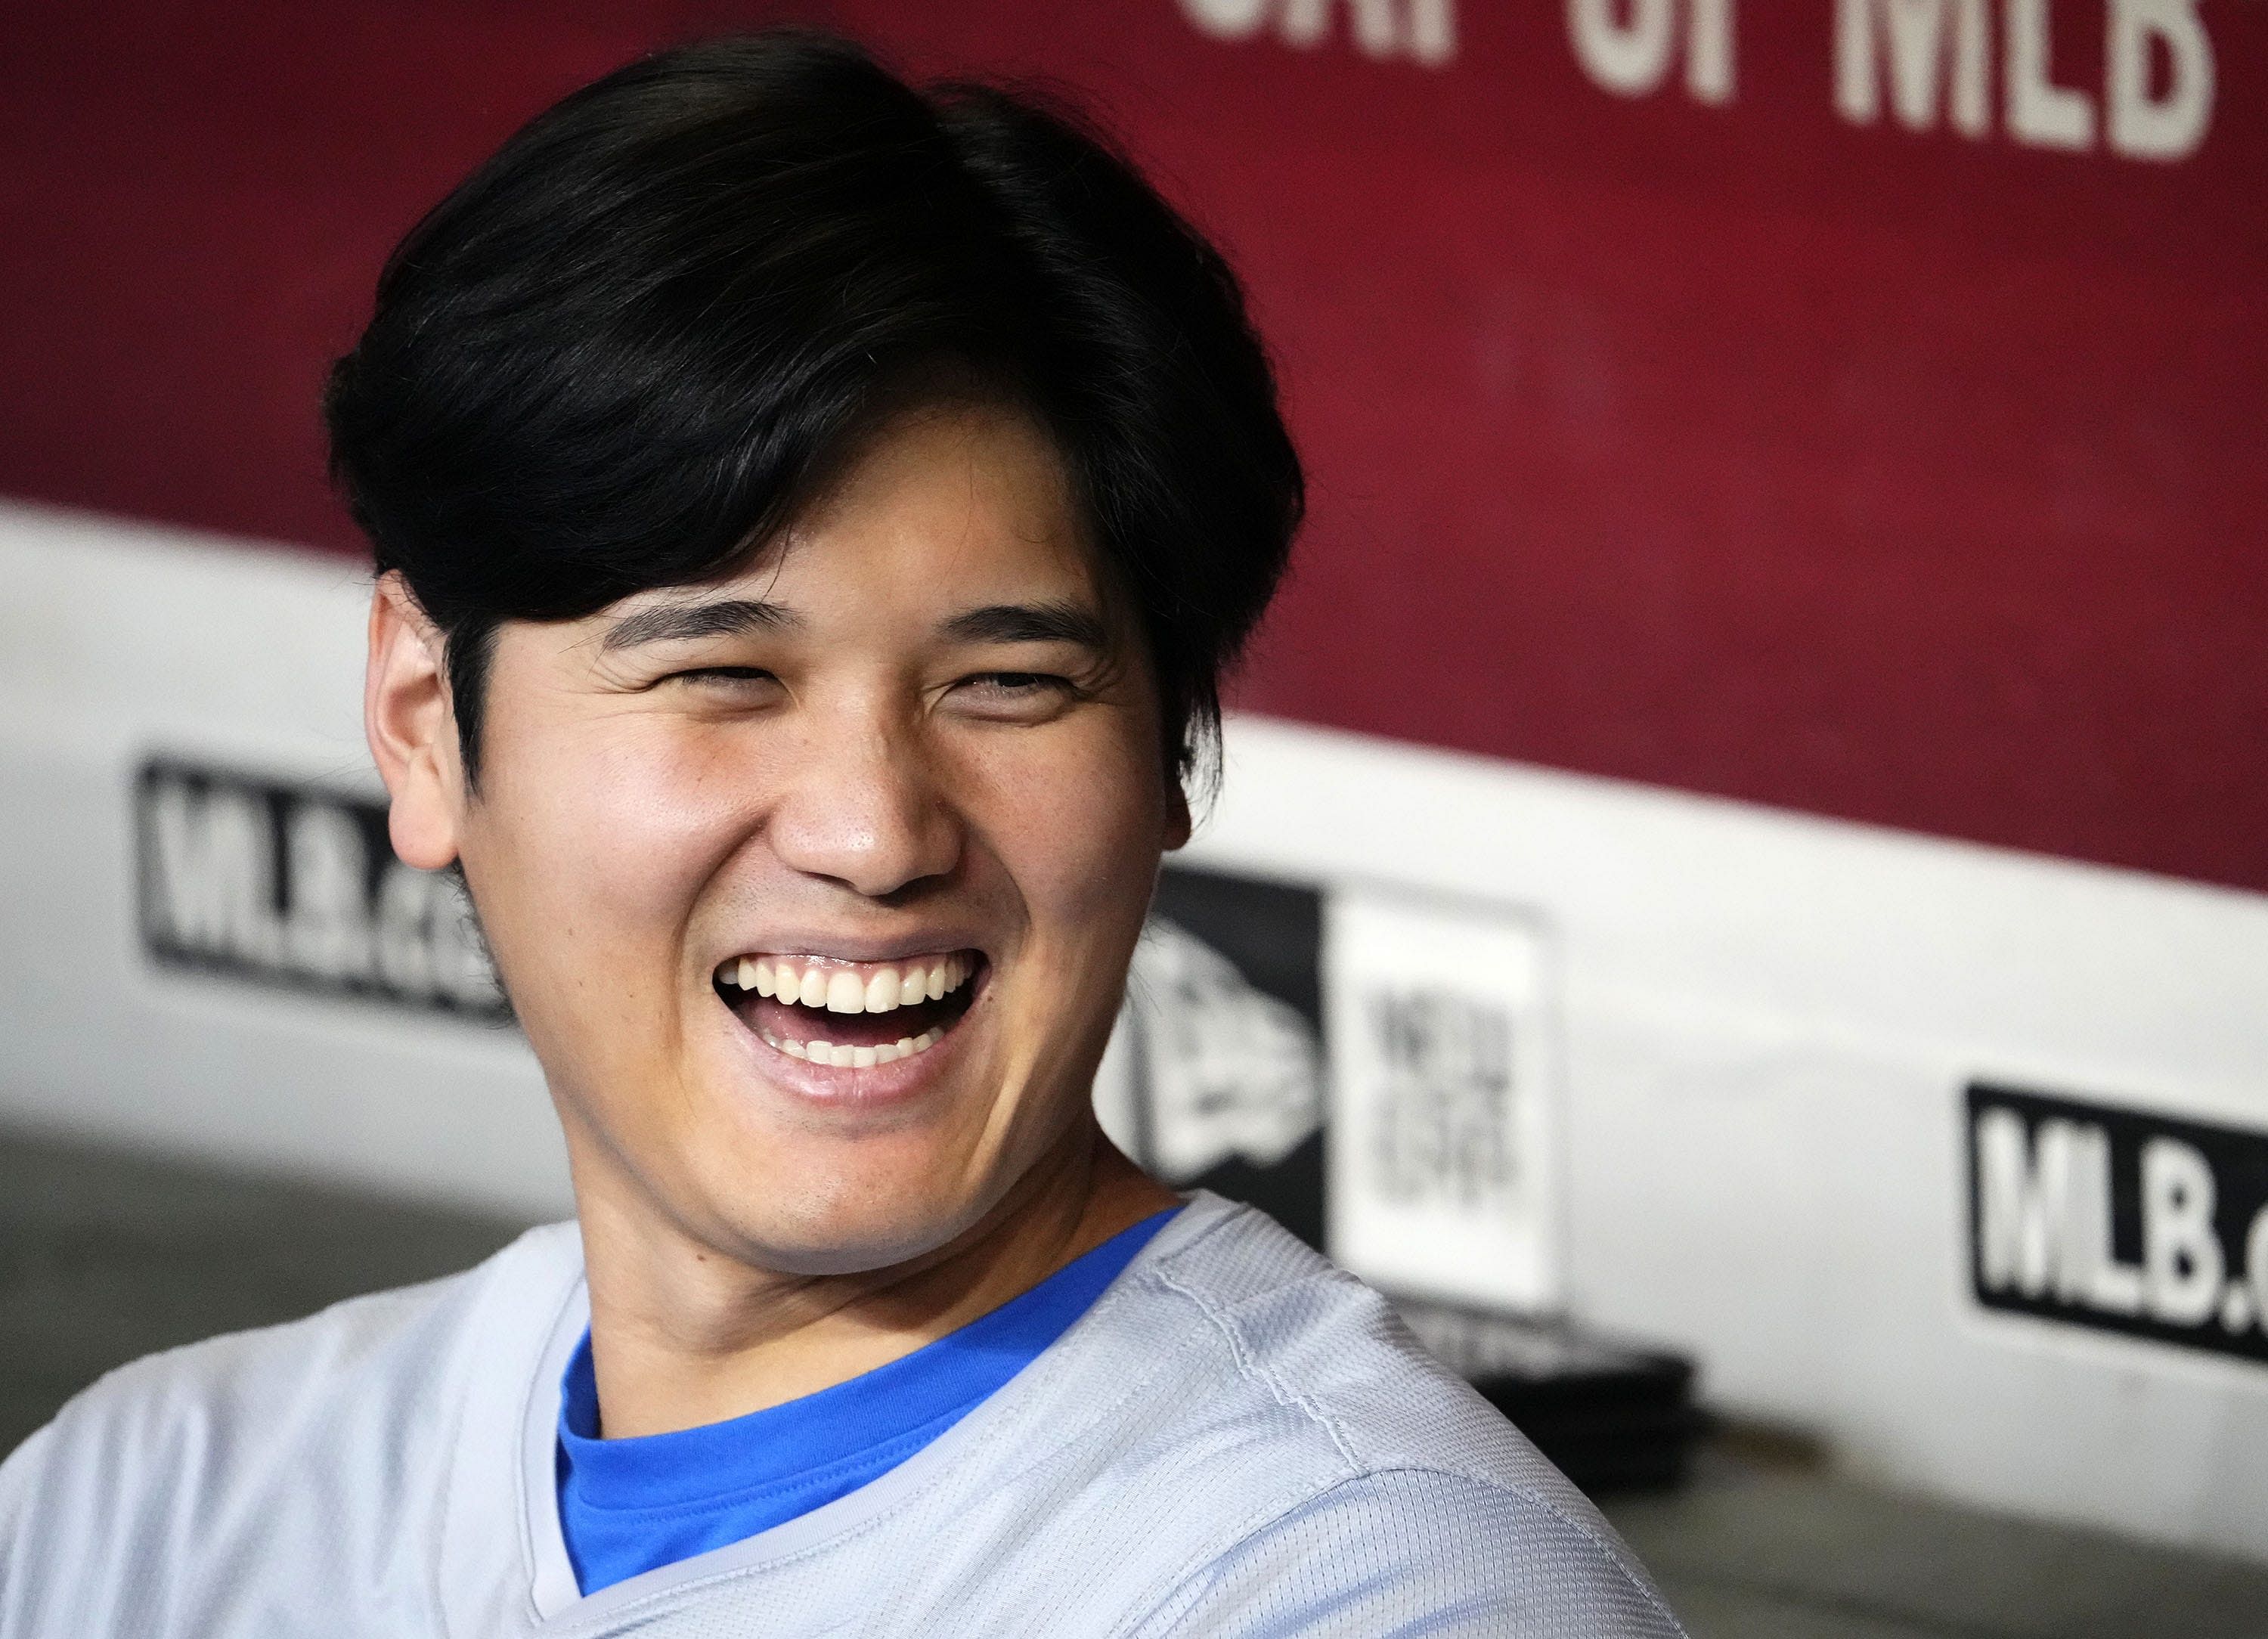 Superstar Shohei Ohtani has been known to bring a number of Japanese companies as sponsors to the Dodgers, signifying much more than just prowess on the field.